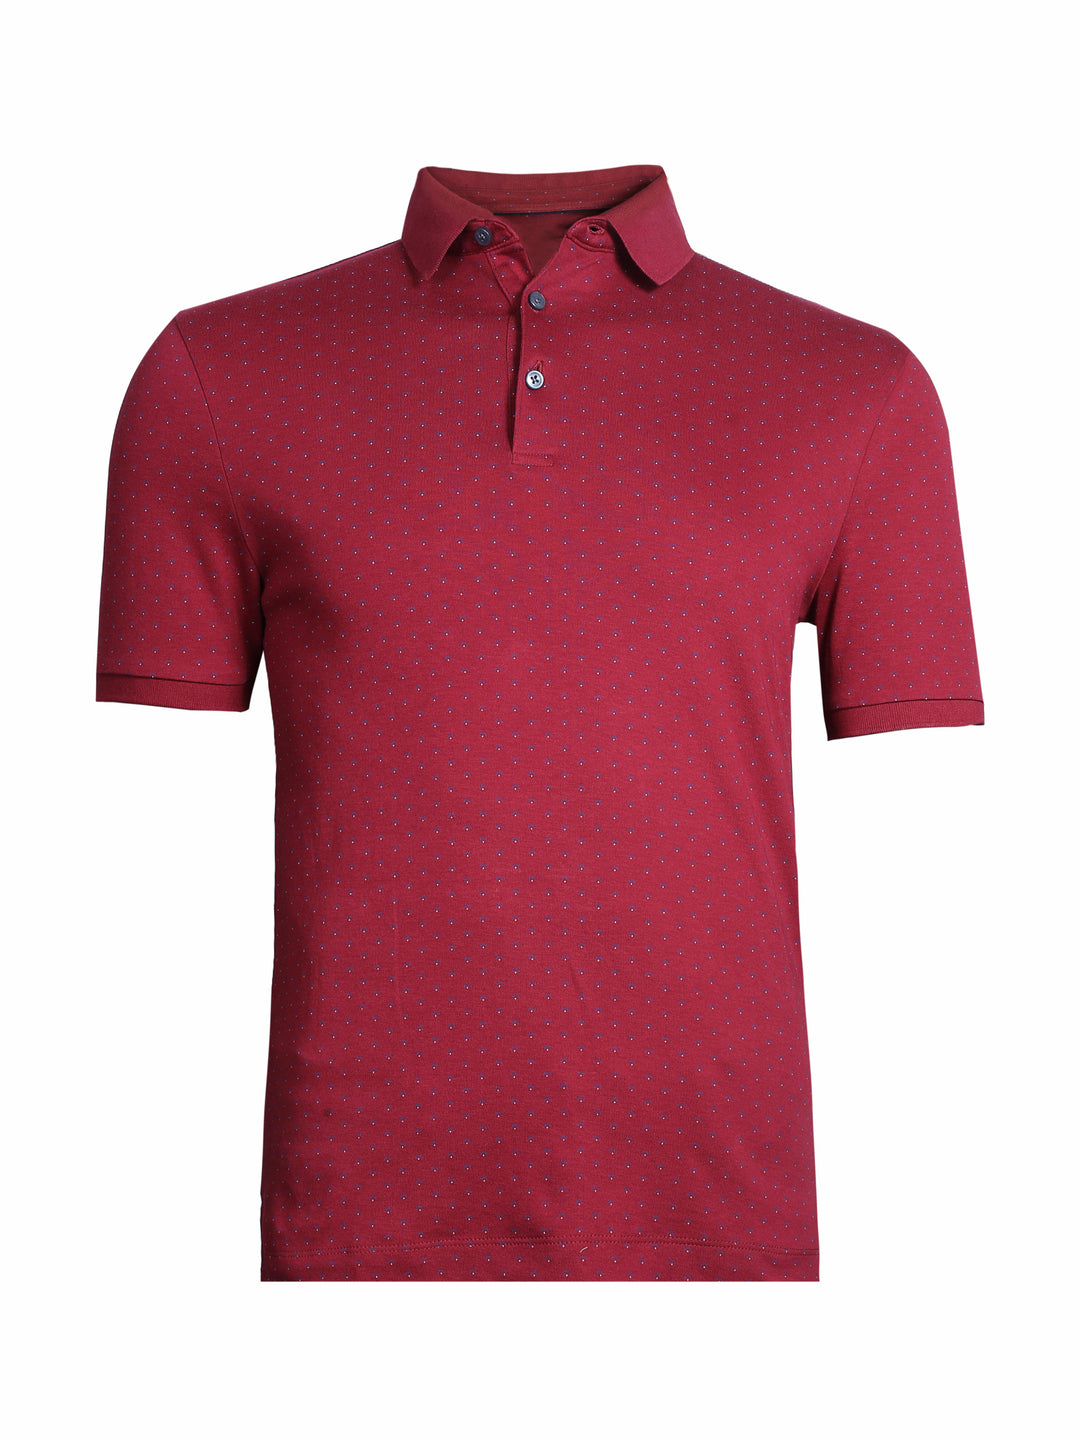 M&S Mens S/S Printed Polo